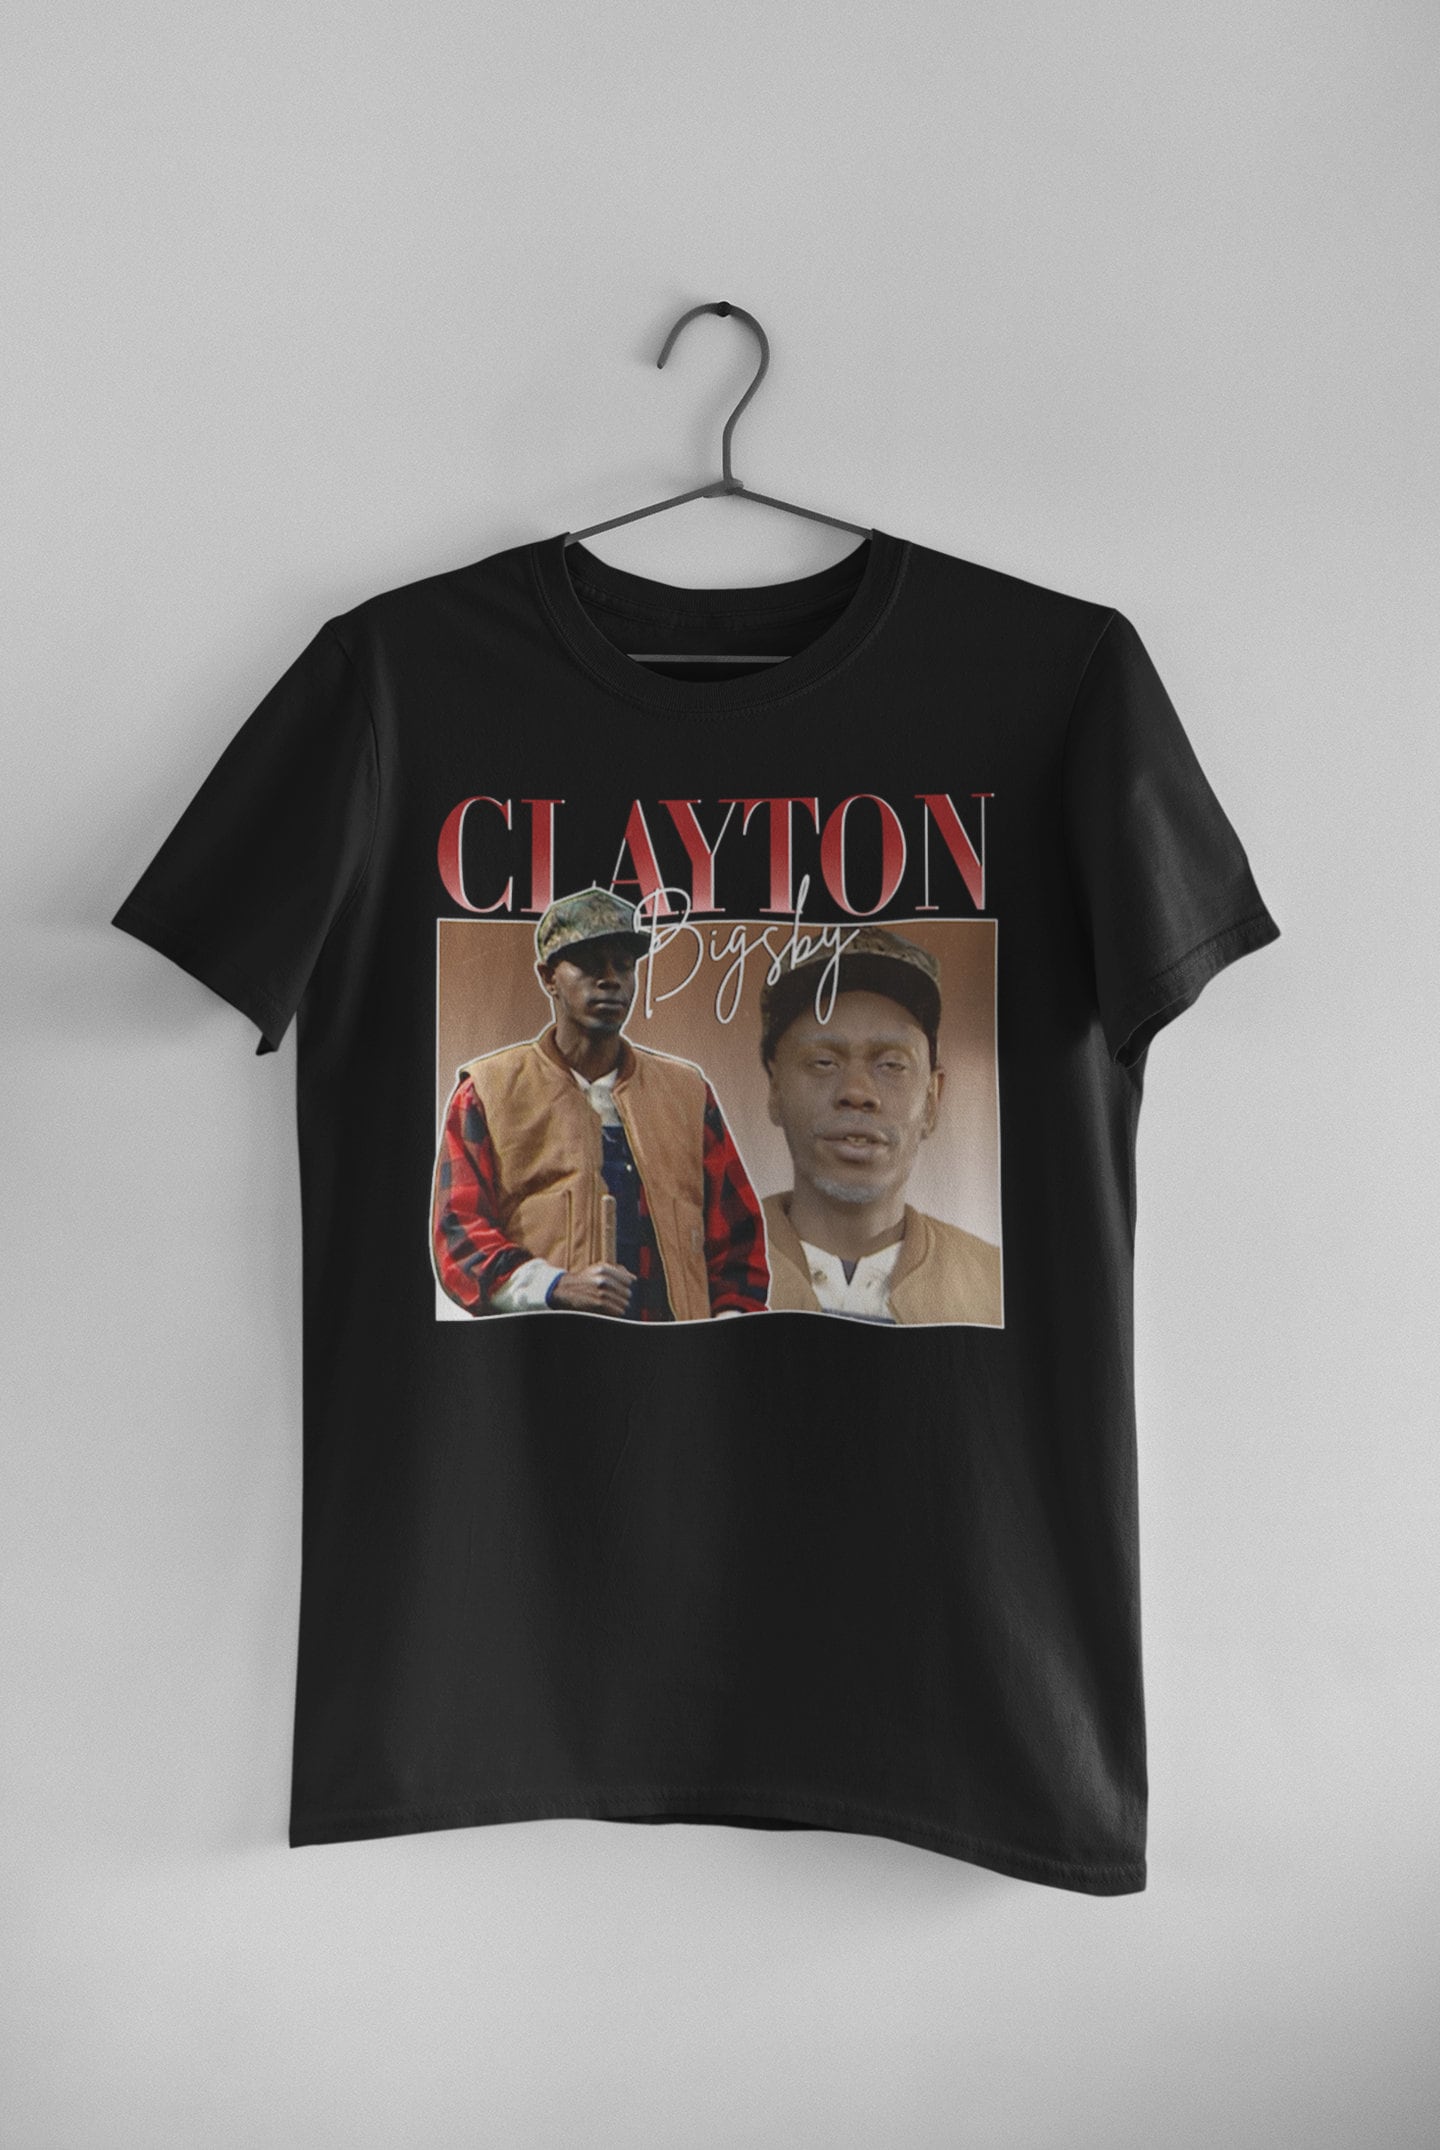 Discover CLAYTON BIGSBY - Chappelle Show - Dave Chappelle